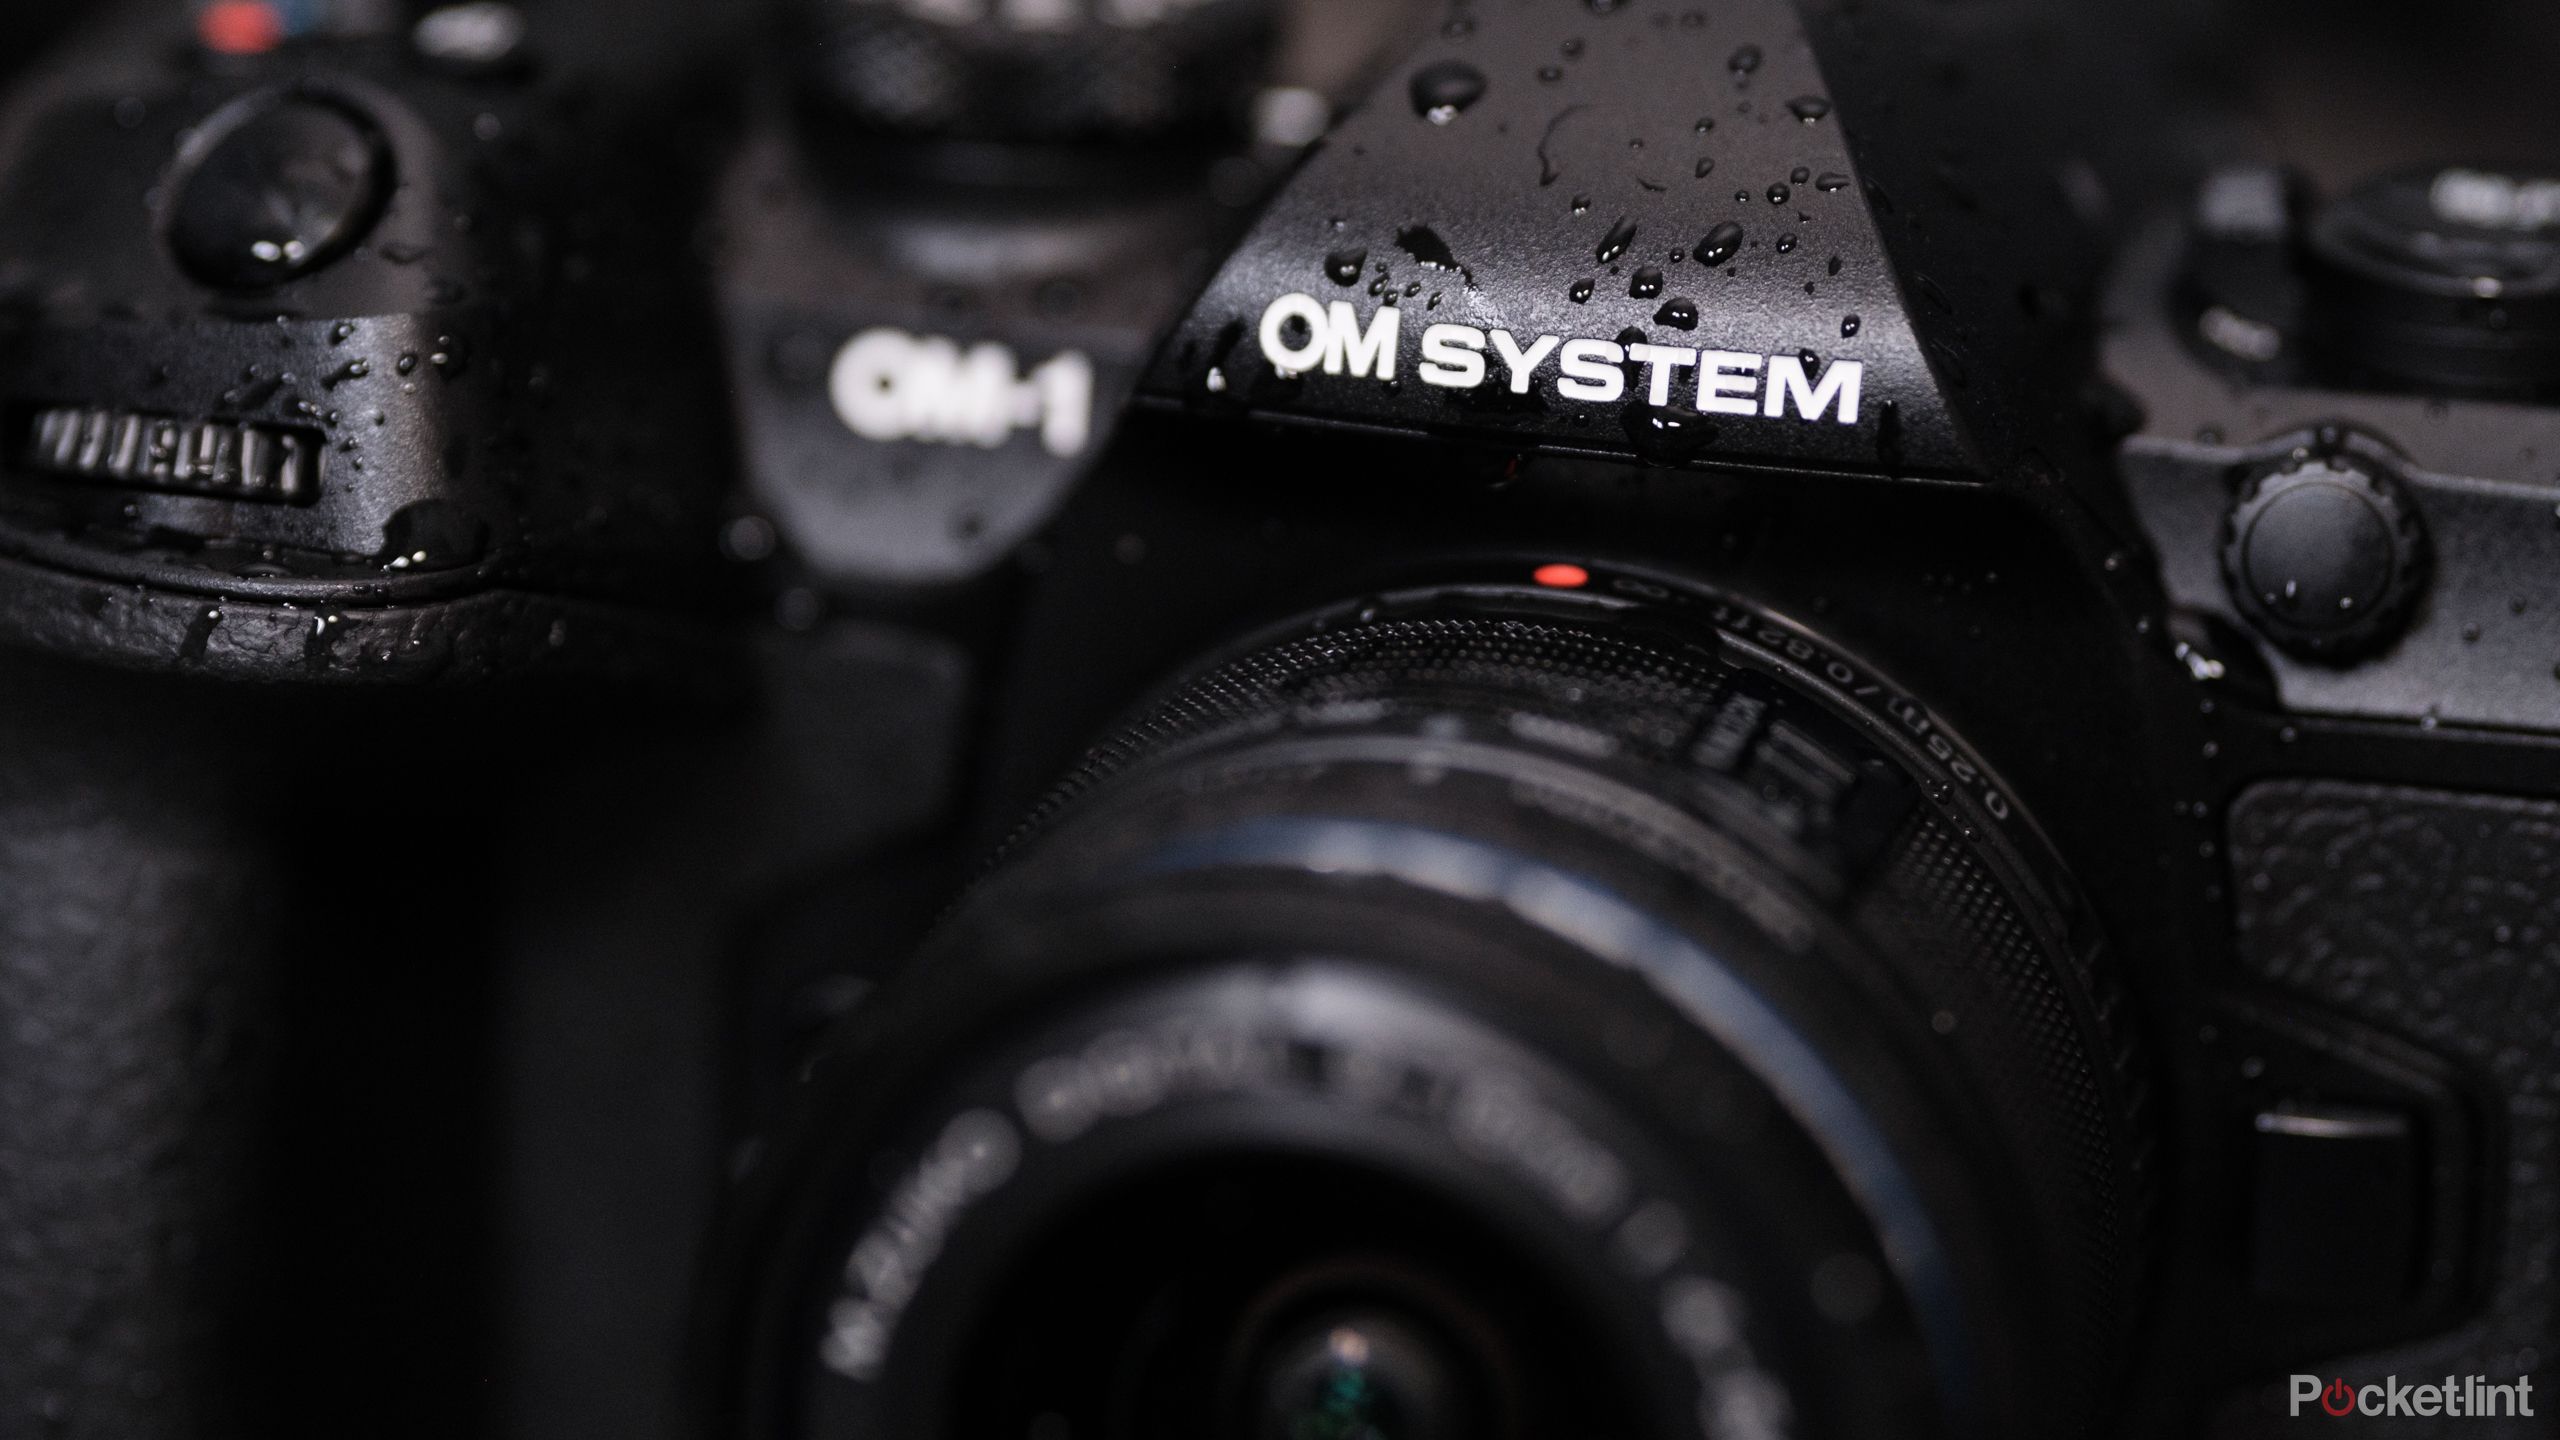 OM-system-OM-1-mark-ii-review-hillary-grigonis-pocket-lint-product-40